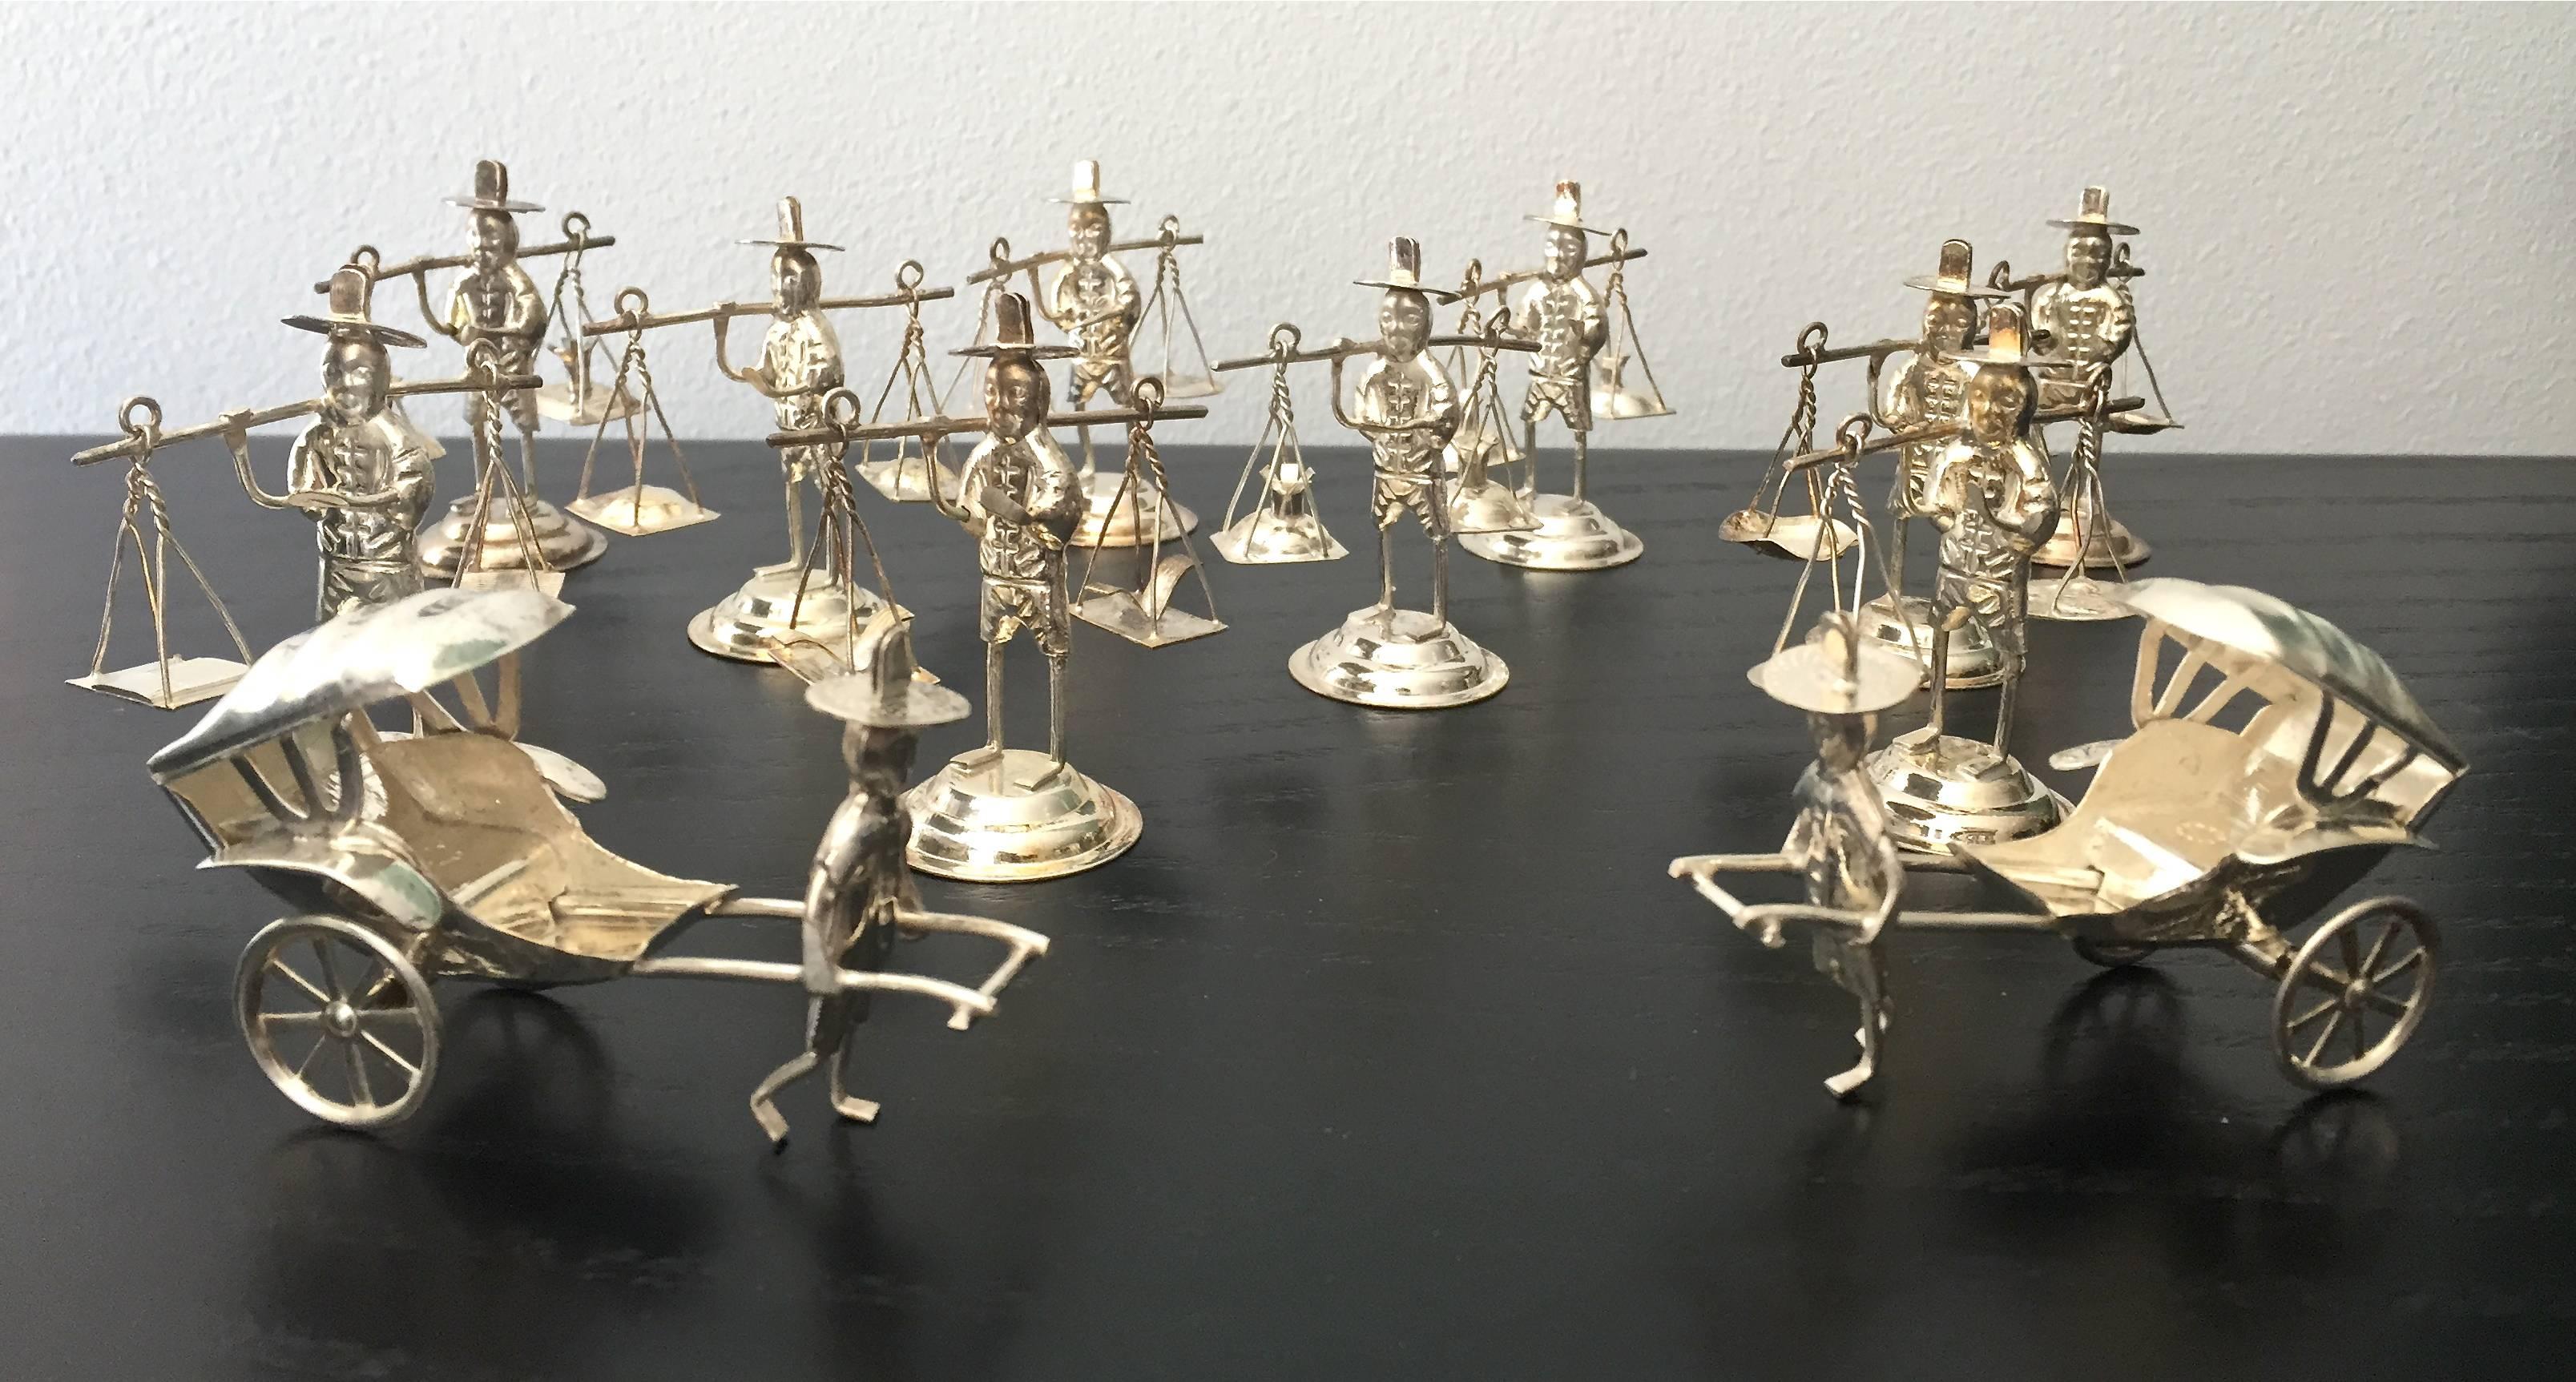 Set of 12 silver plate place card holders in the form of orientalist Chinese figures.

Size indicated in the measurement description field is the size of the ten standing figures. Measurement of the two rickshaw figures are as follows, depth 3